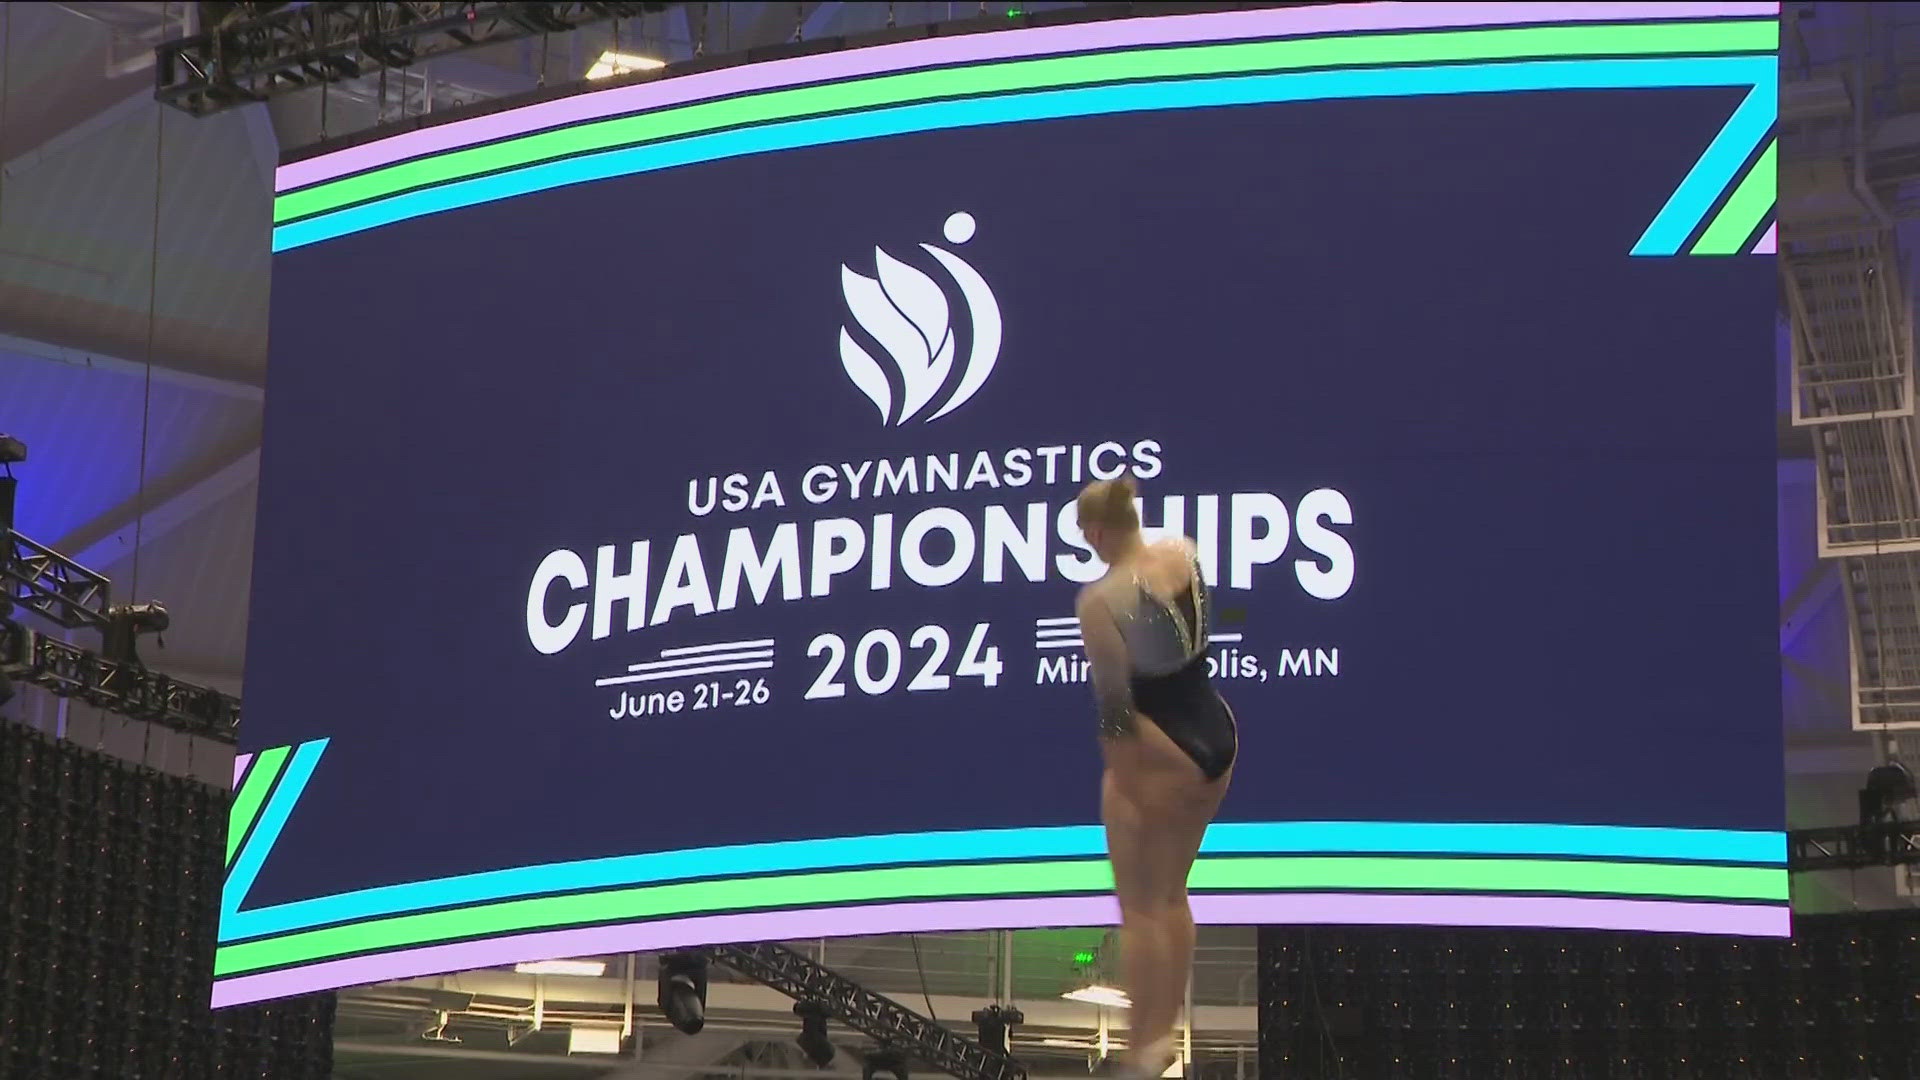 The U.S. Gymnastics trials will be held at Target Center from Thursday, June 27 through Sunday, June 30.